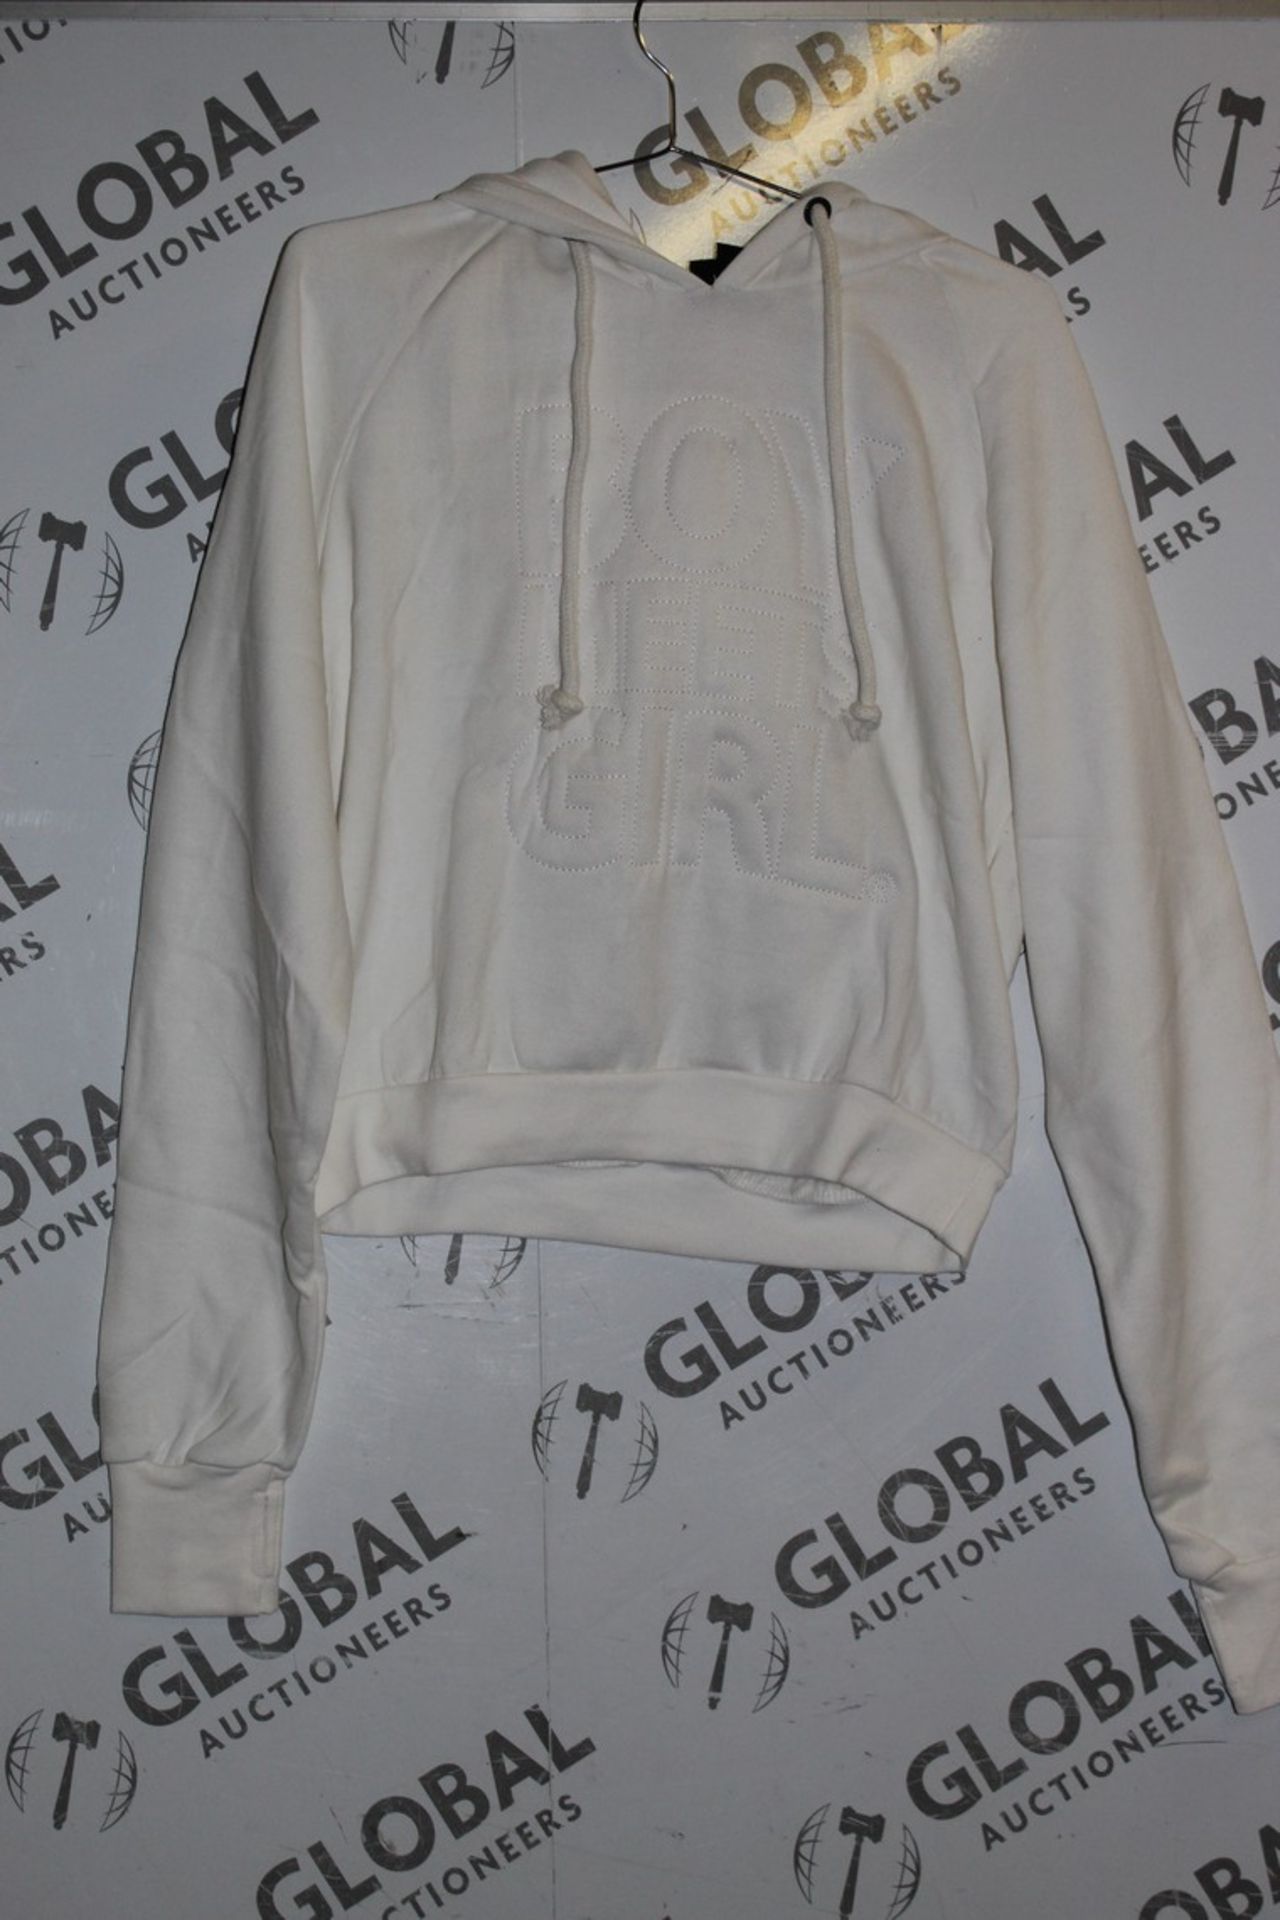 Lot to Contain 27 Brand New Boy Meets Girl Girls Hooded Jumpers in White RRP £19.99 Each Combined